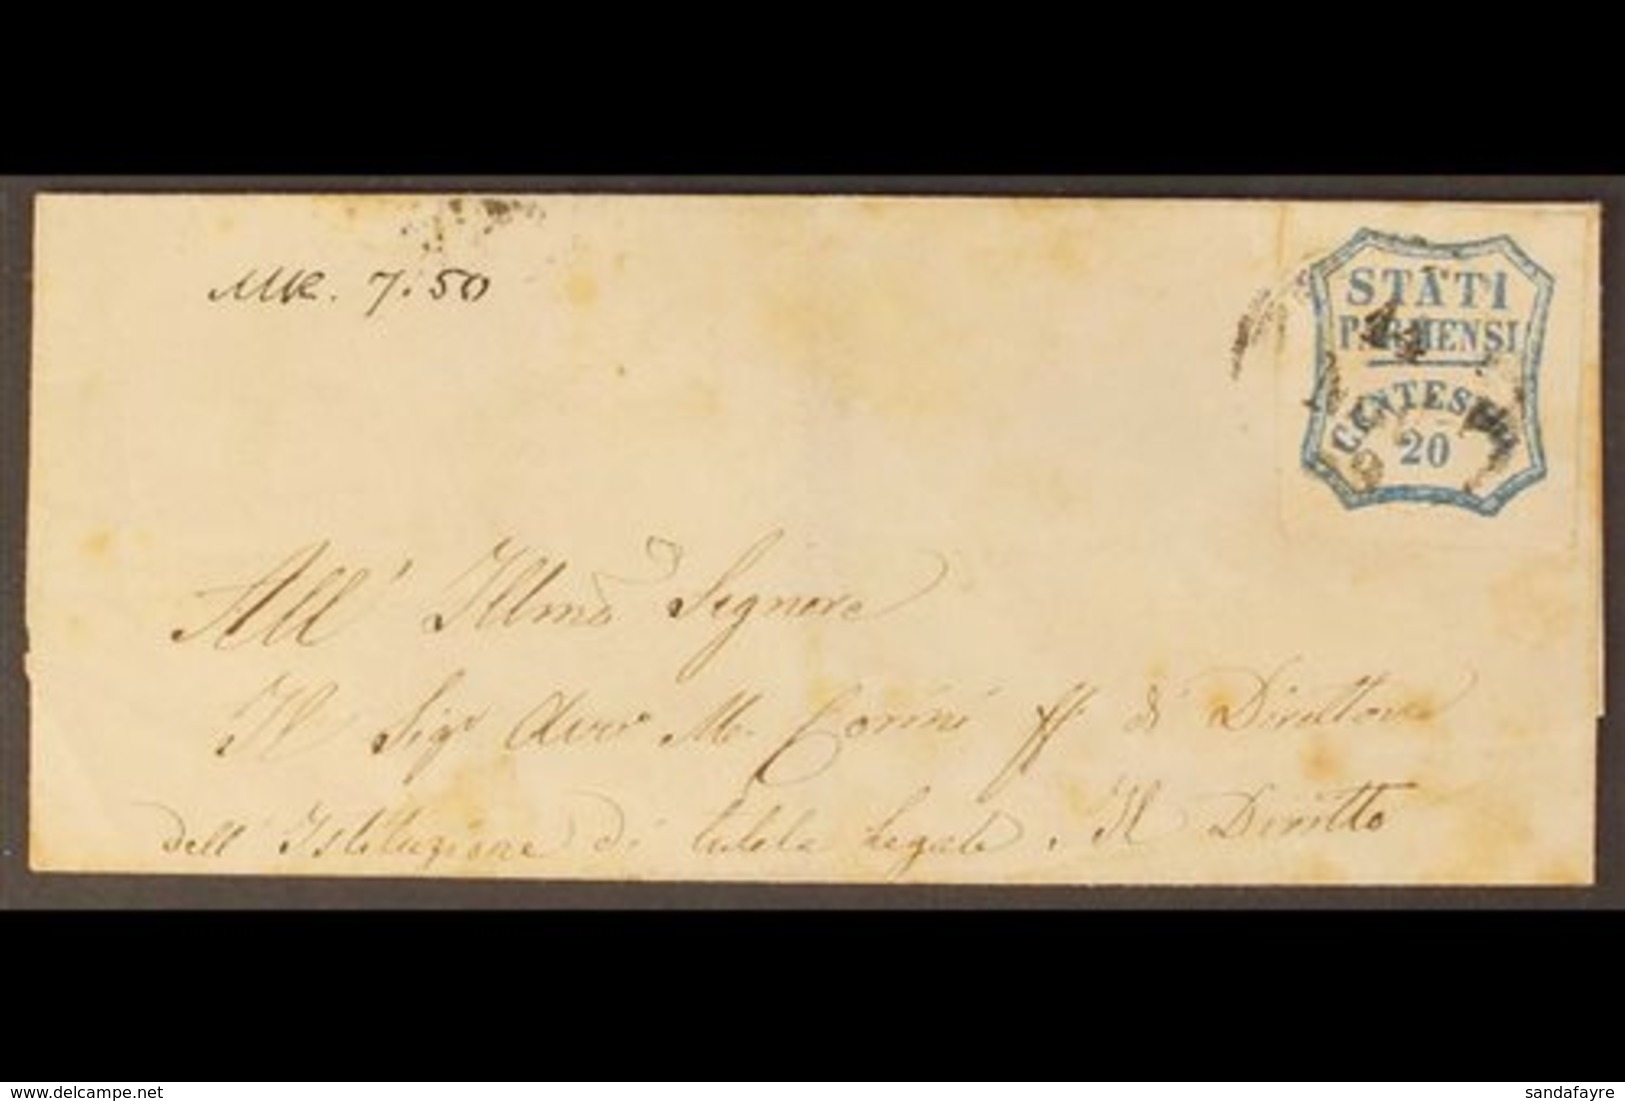 PARMA 1859 Wrapper To Genova Franked 20c Blue Provisional, Sass15, Tied By Parma 11 Nov 59 Cds. Some Peripheral Toning B - Unclassified